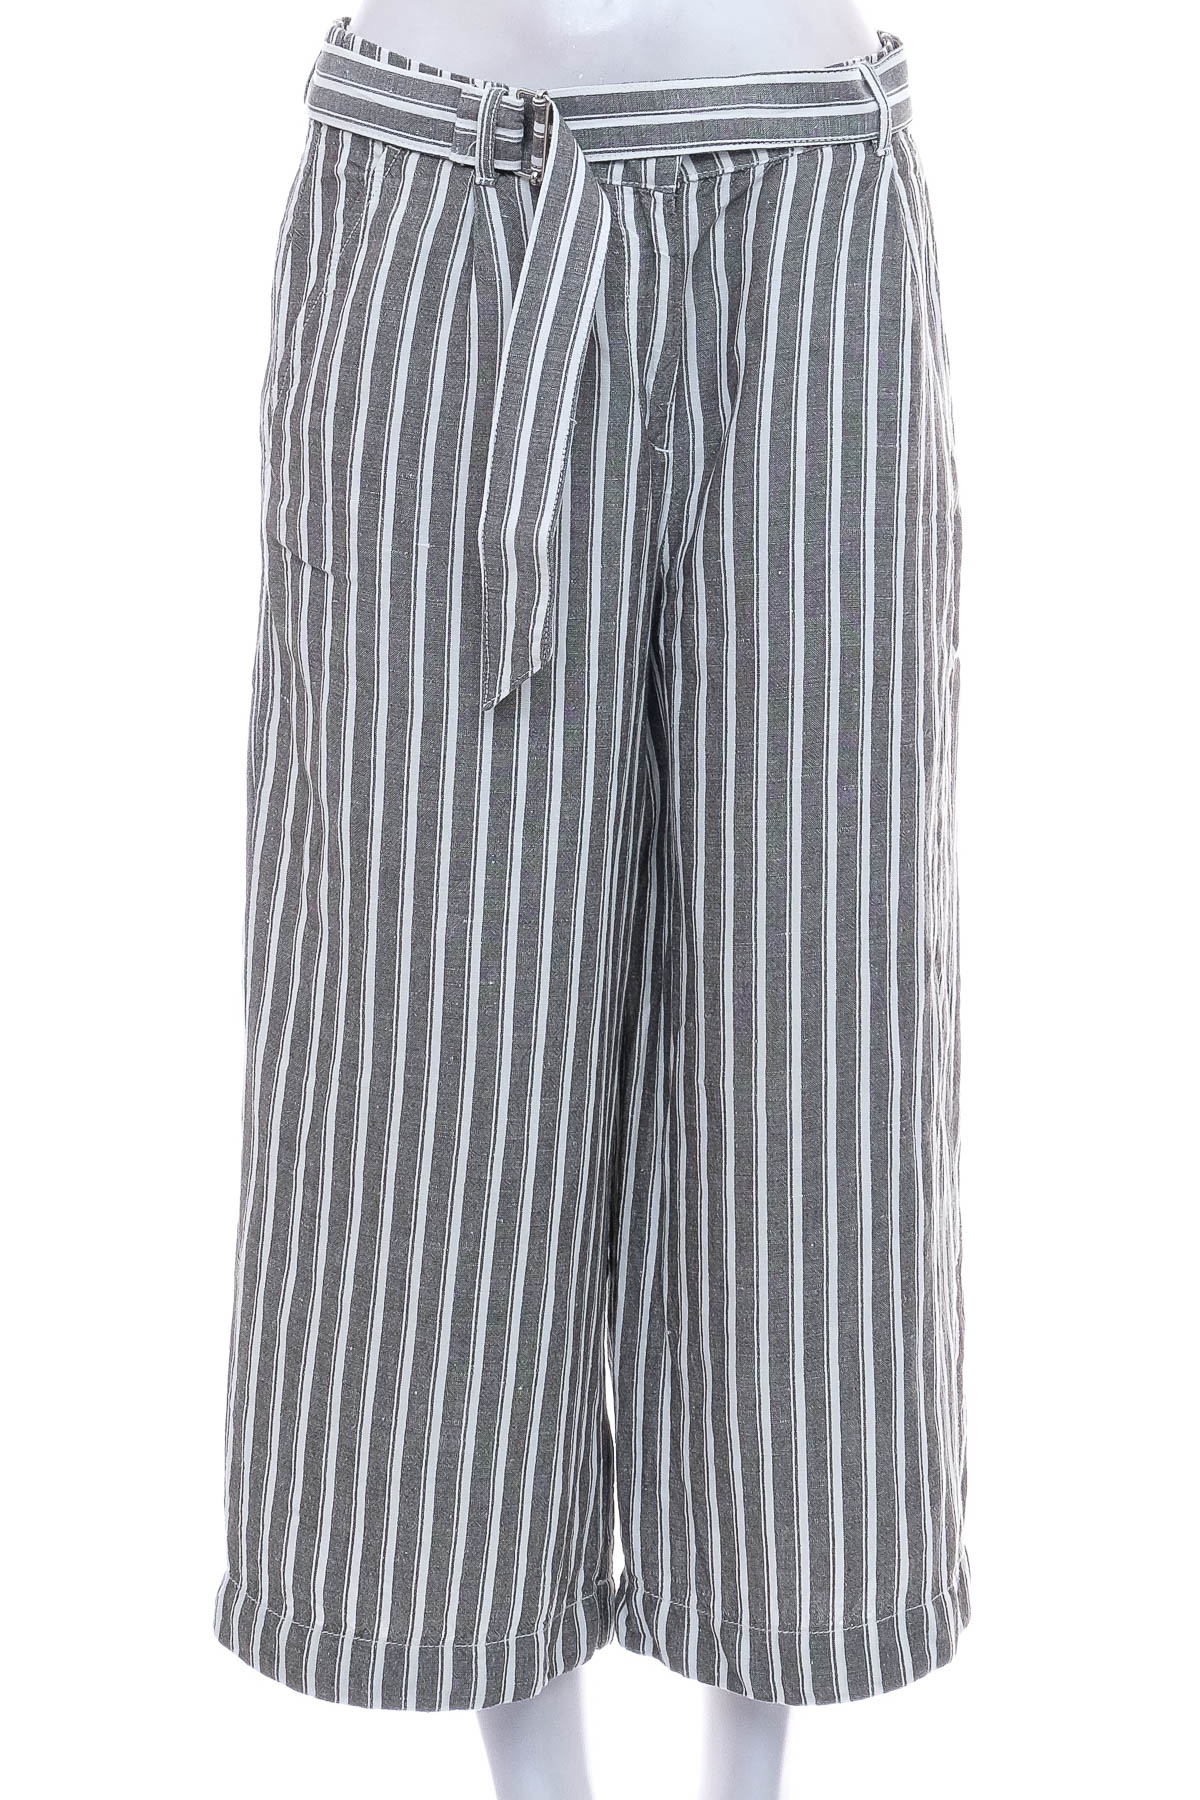 Women's trousers - TOM TAILOR - 0